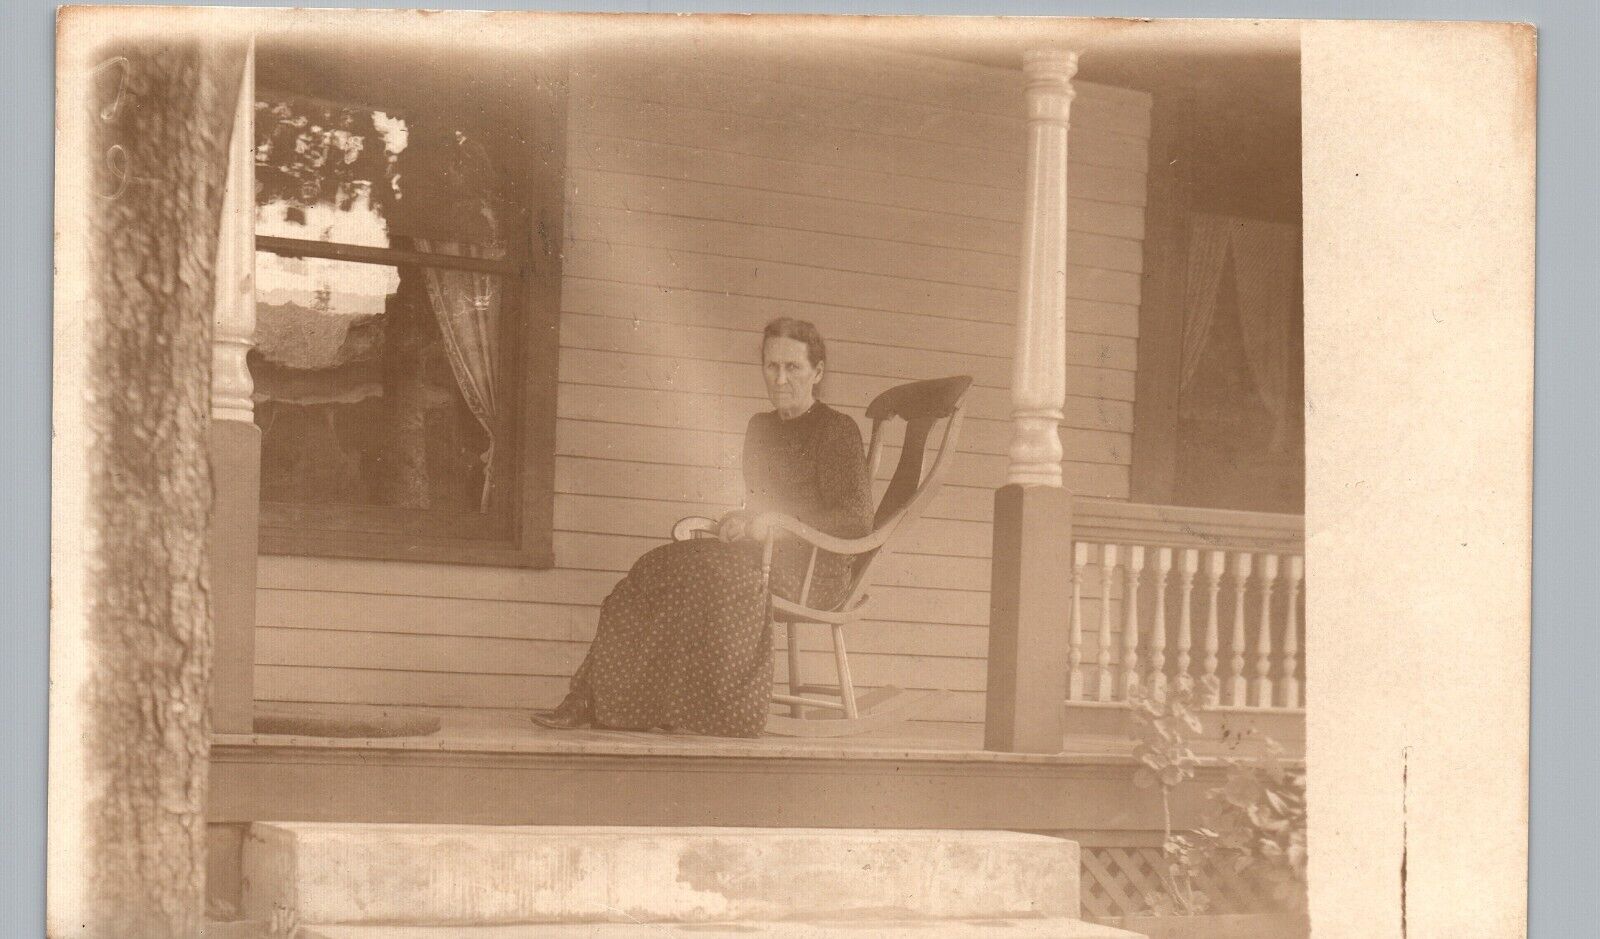 OLD WOMAN PORCH CHAIR troy oh real-photo postcard rppc ohio history ~exact spot